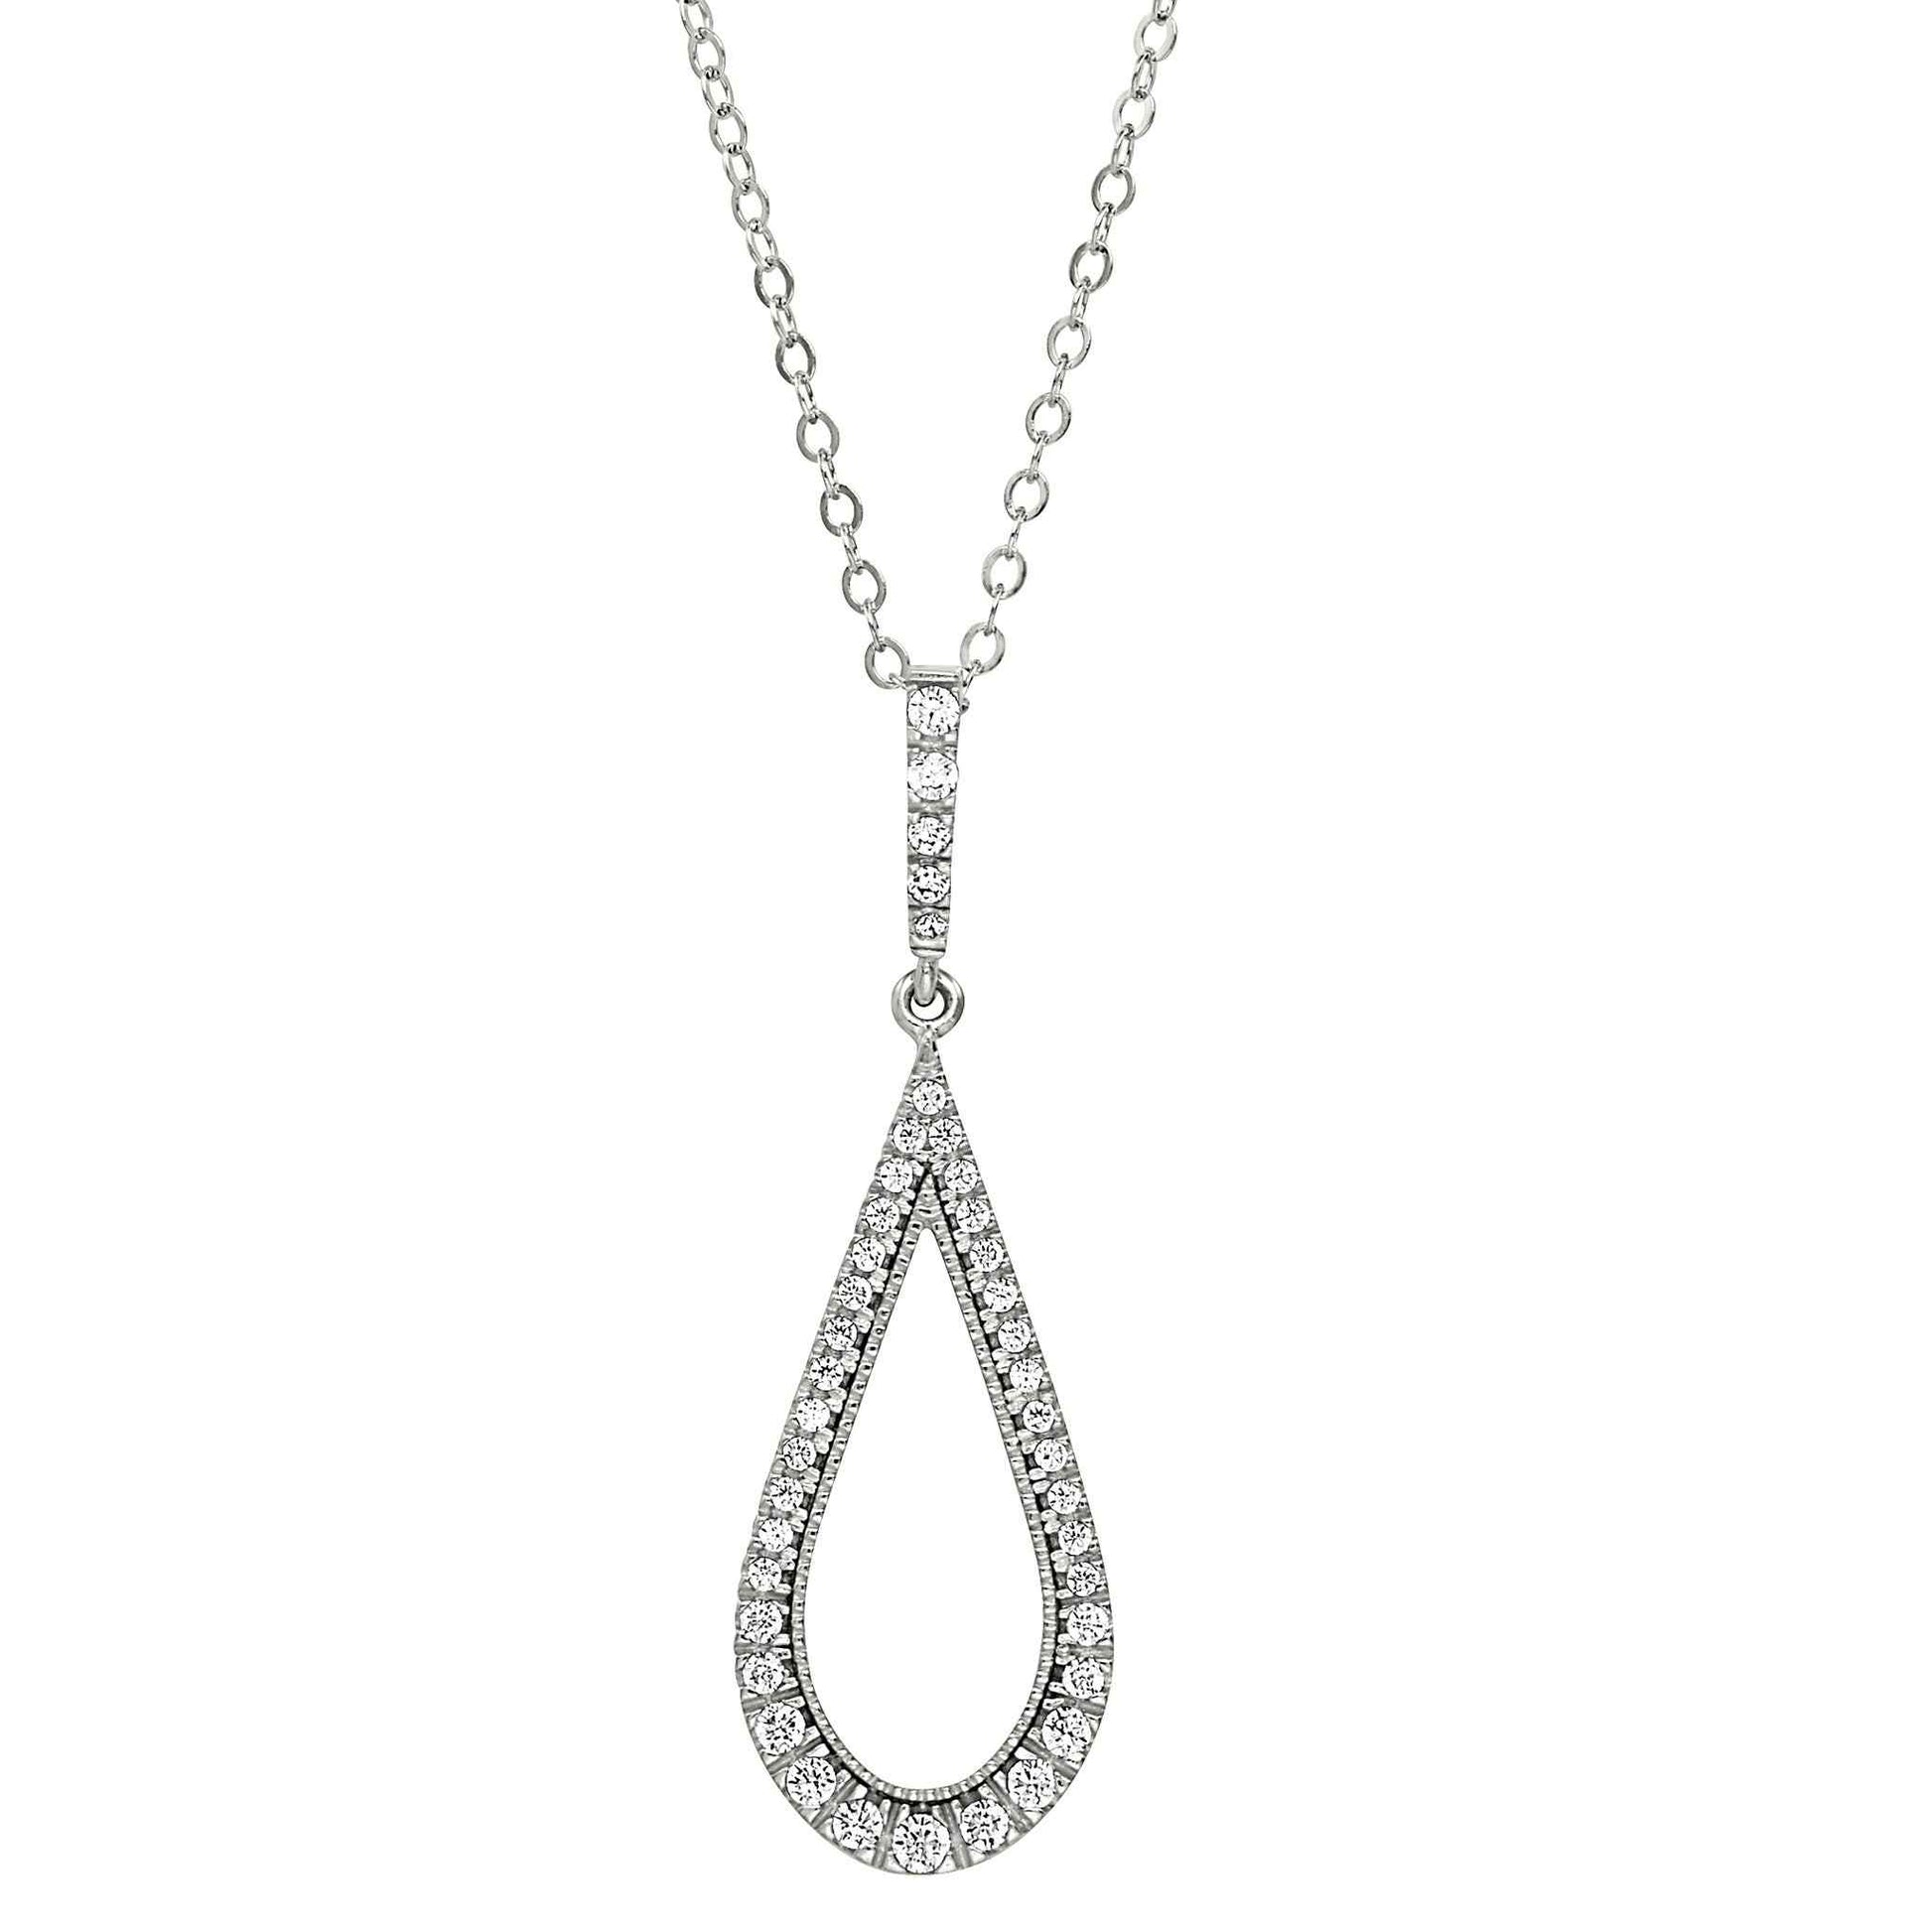 A sterling silver teardrop necklace with simulated diamonds displayed on a neutral white background.